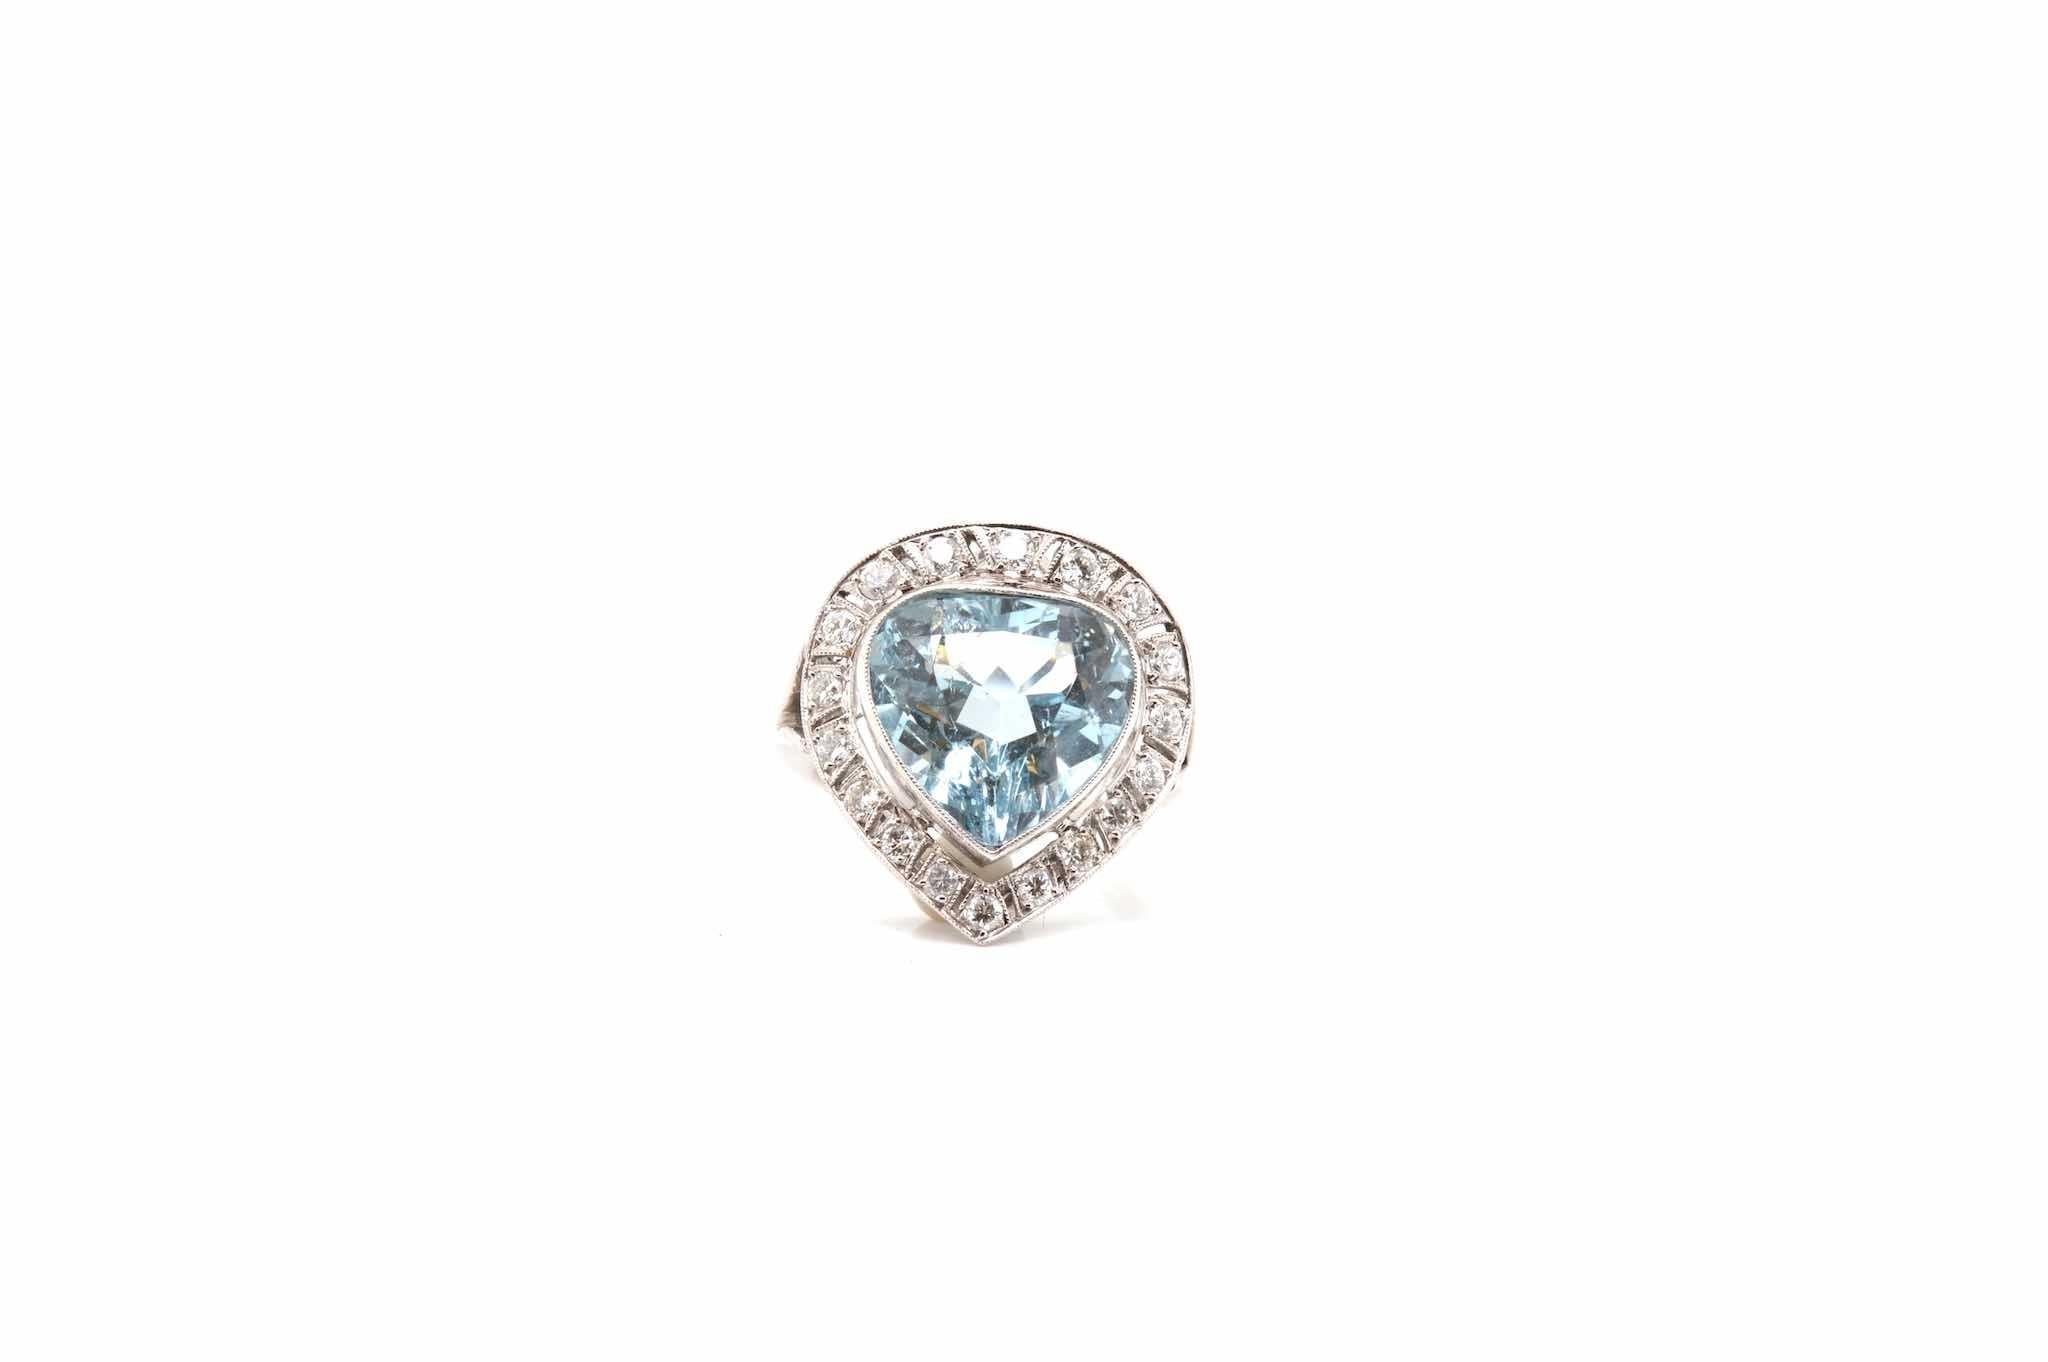 Stones: Aquamarine and old cut diamonds
for a total weight of 0.45 carats.
Material: Platinum
Dimensions: 21 x 19 mm
Weight: 7.8g
Size: 52 (free sizing)
Certificate
Ref. : 24749